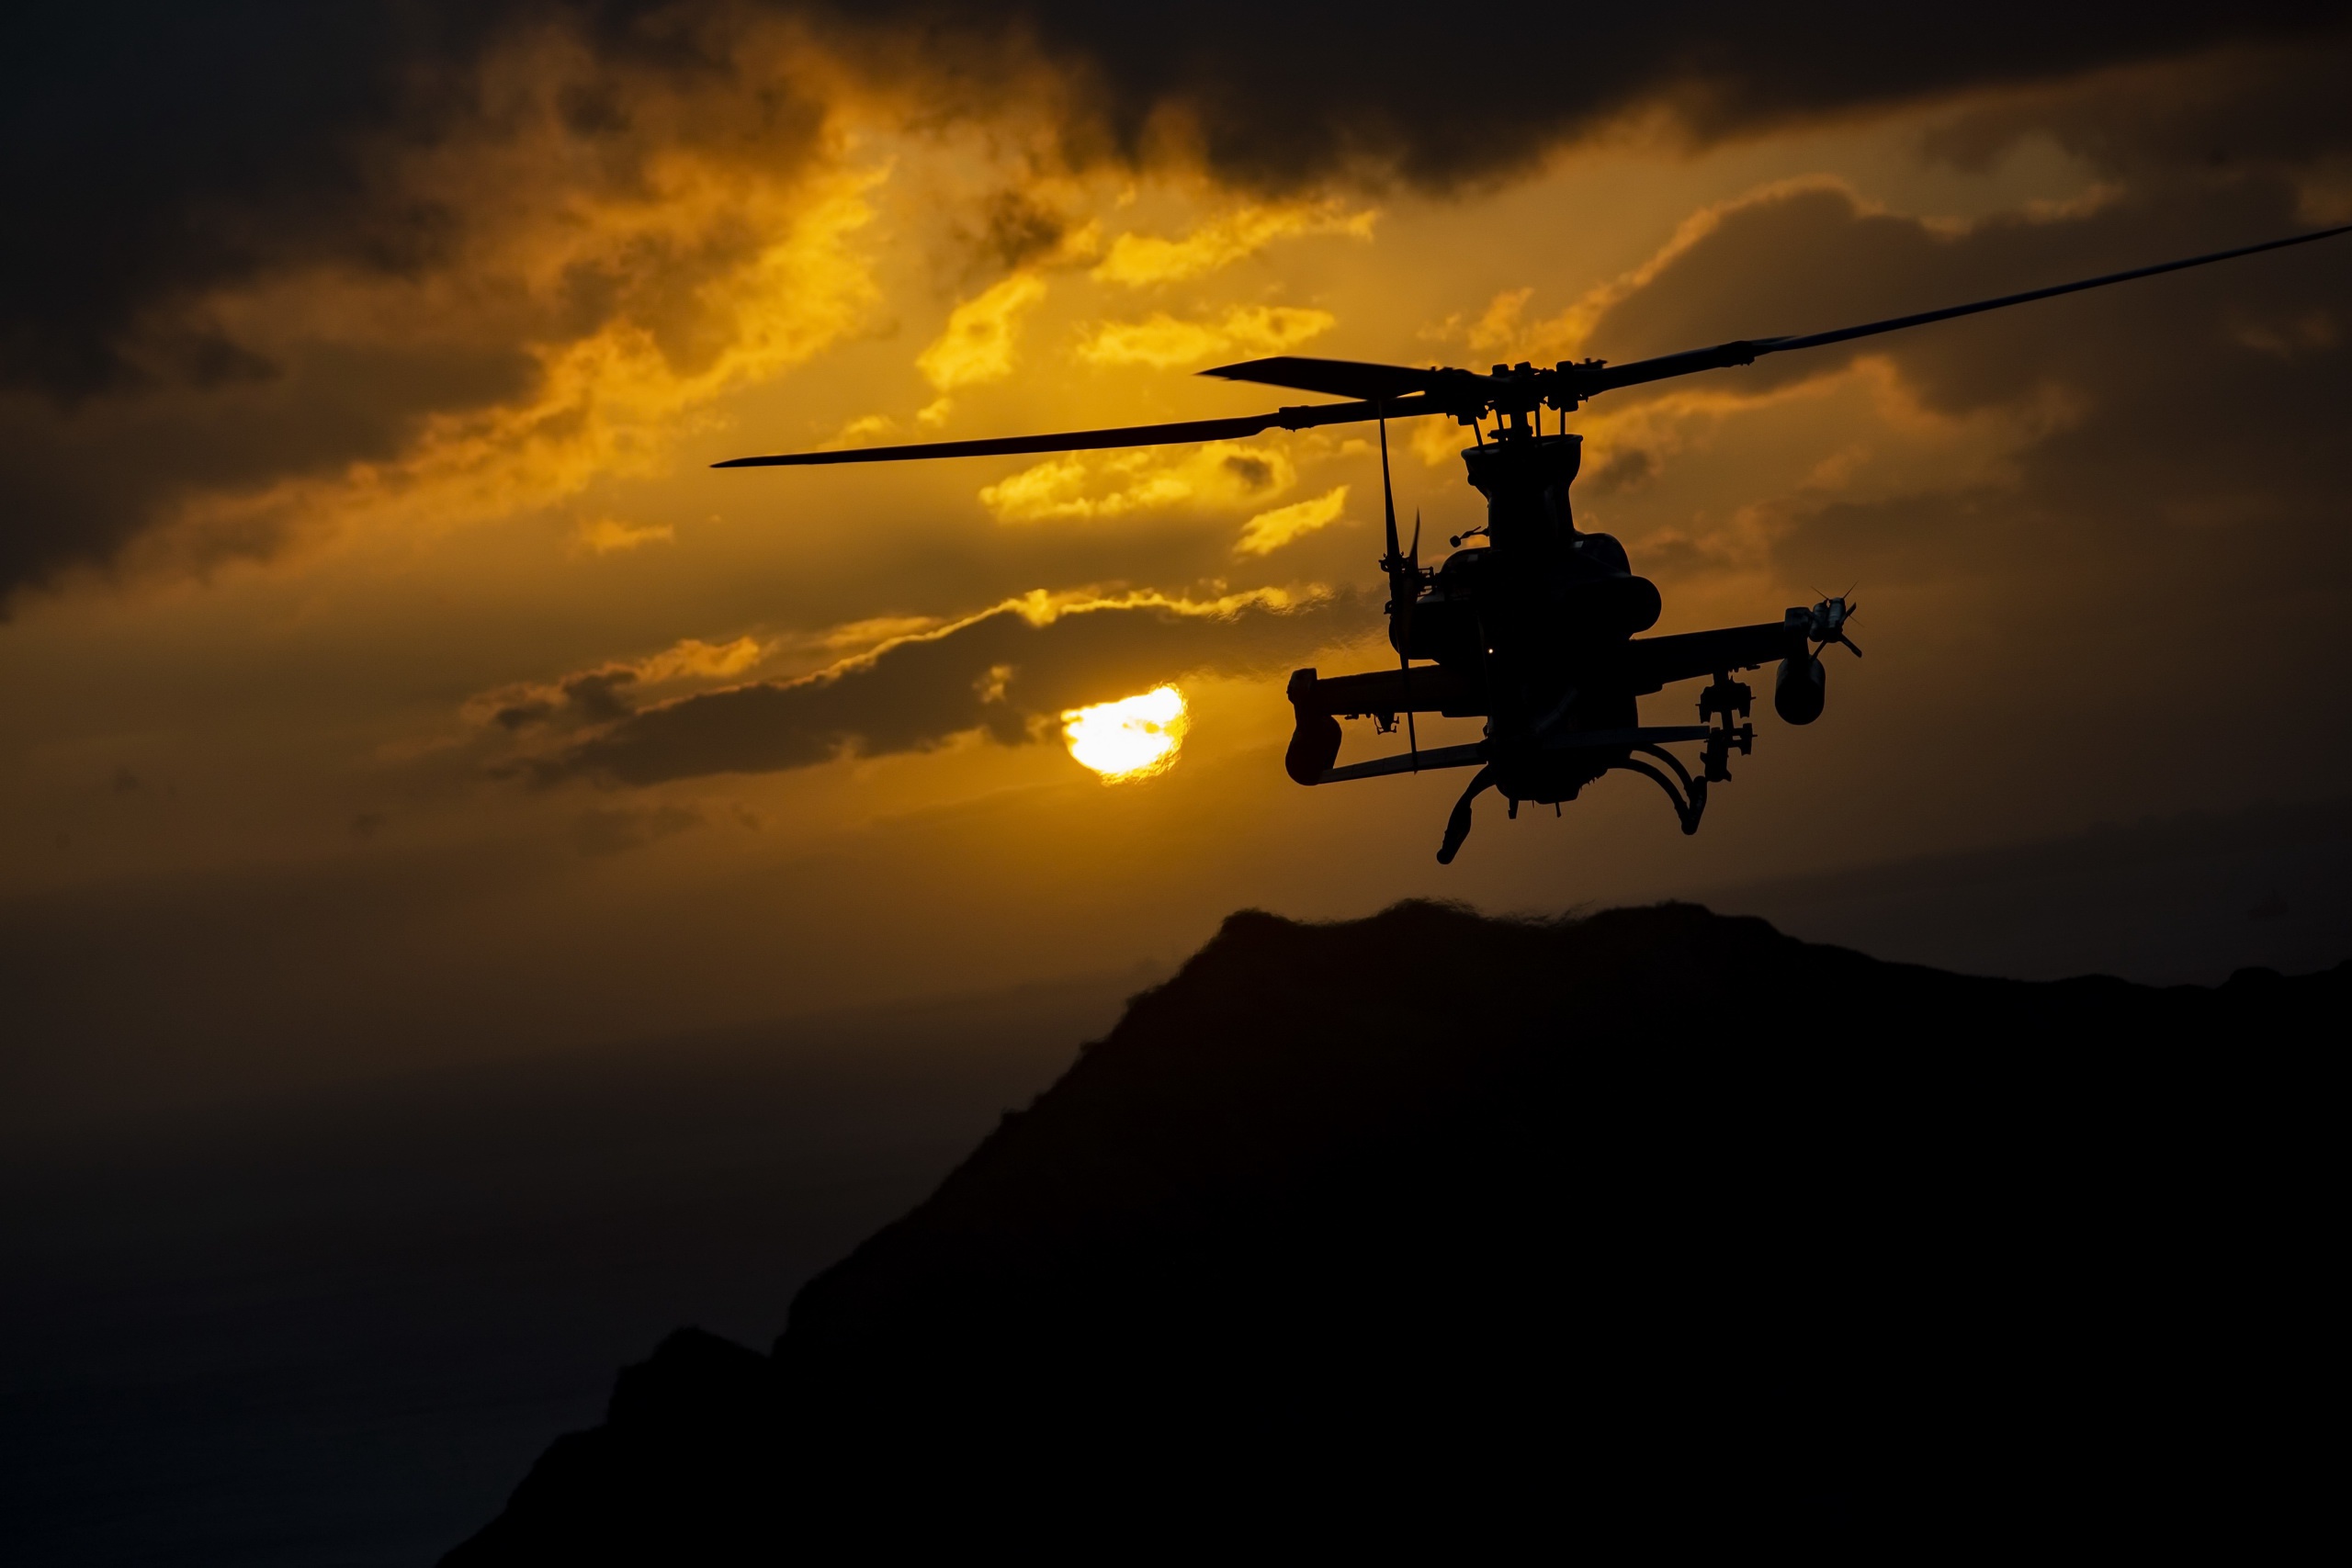 General 2560x1707 dark aircraft helicopters vehicle AH-1Z Viper military aircraft military military vehicle Sun sky